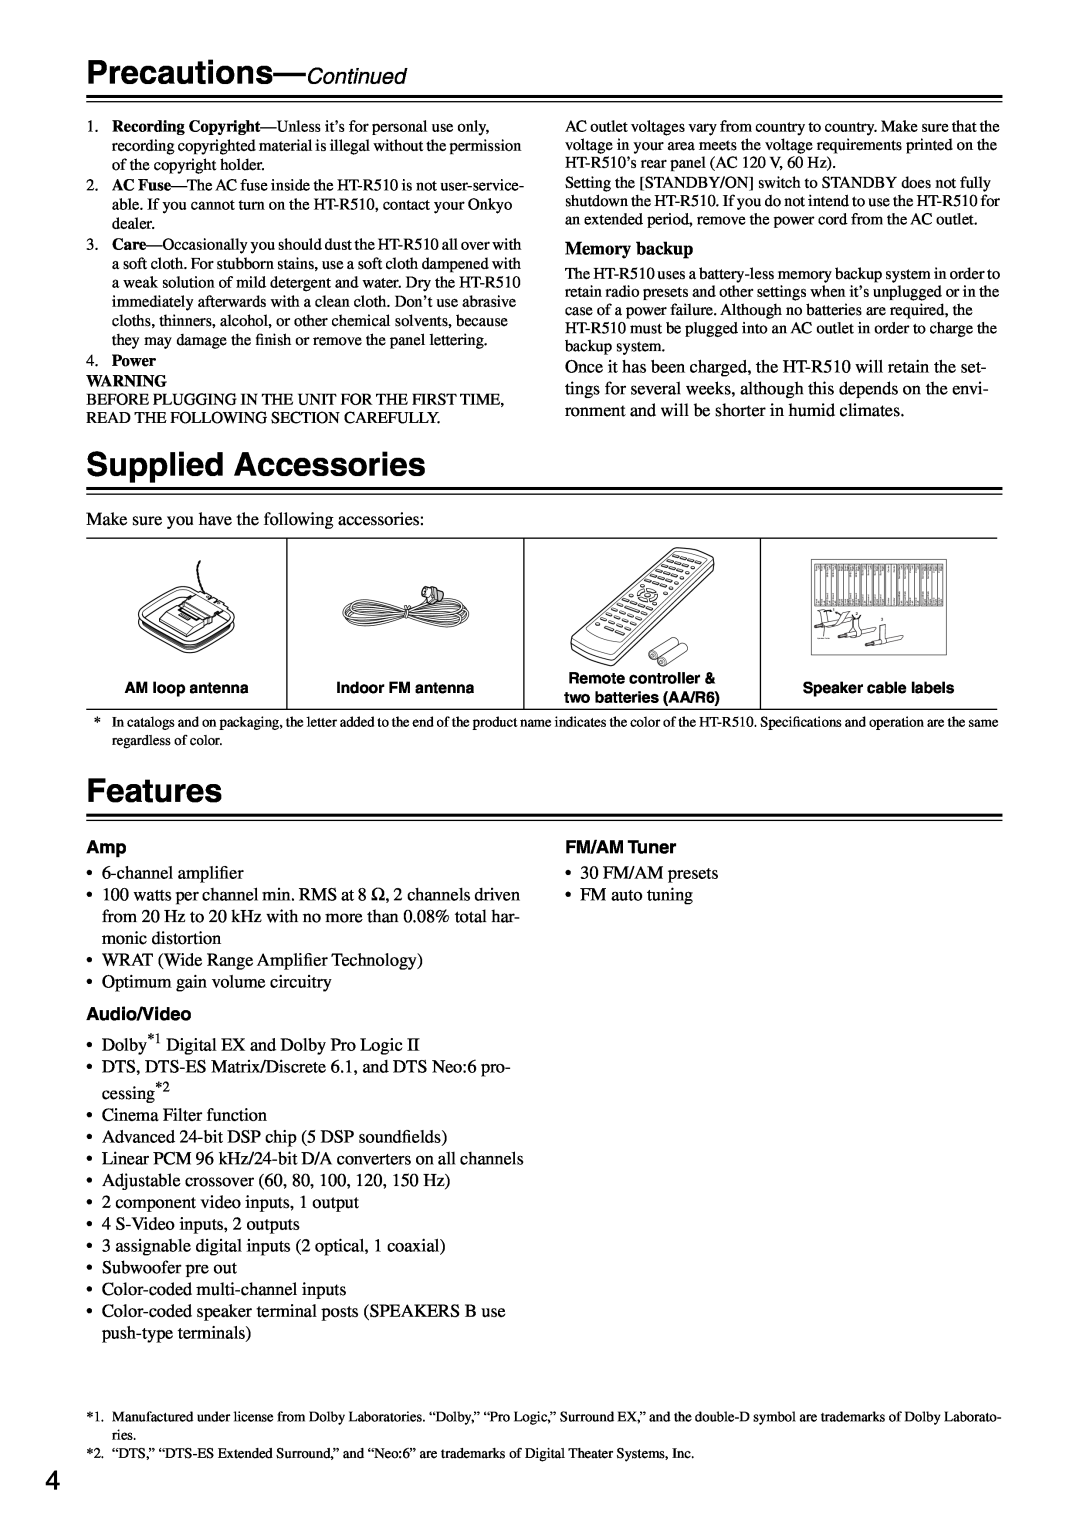 Onkyo HT-R510 instruction manual Precautions-Continued, Supplied Accessories, Features, Memory backup 